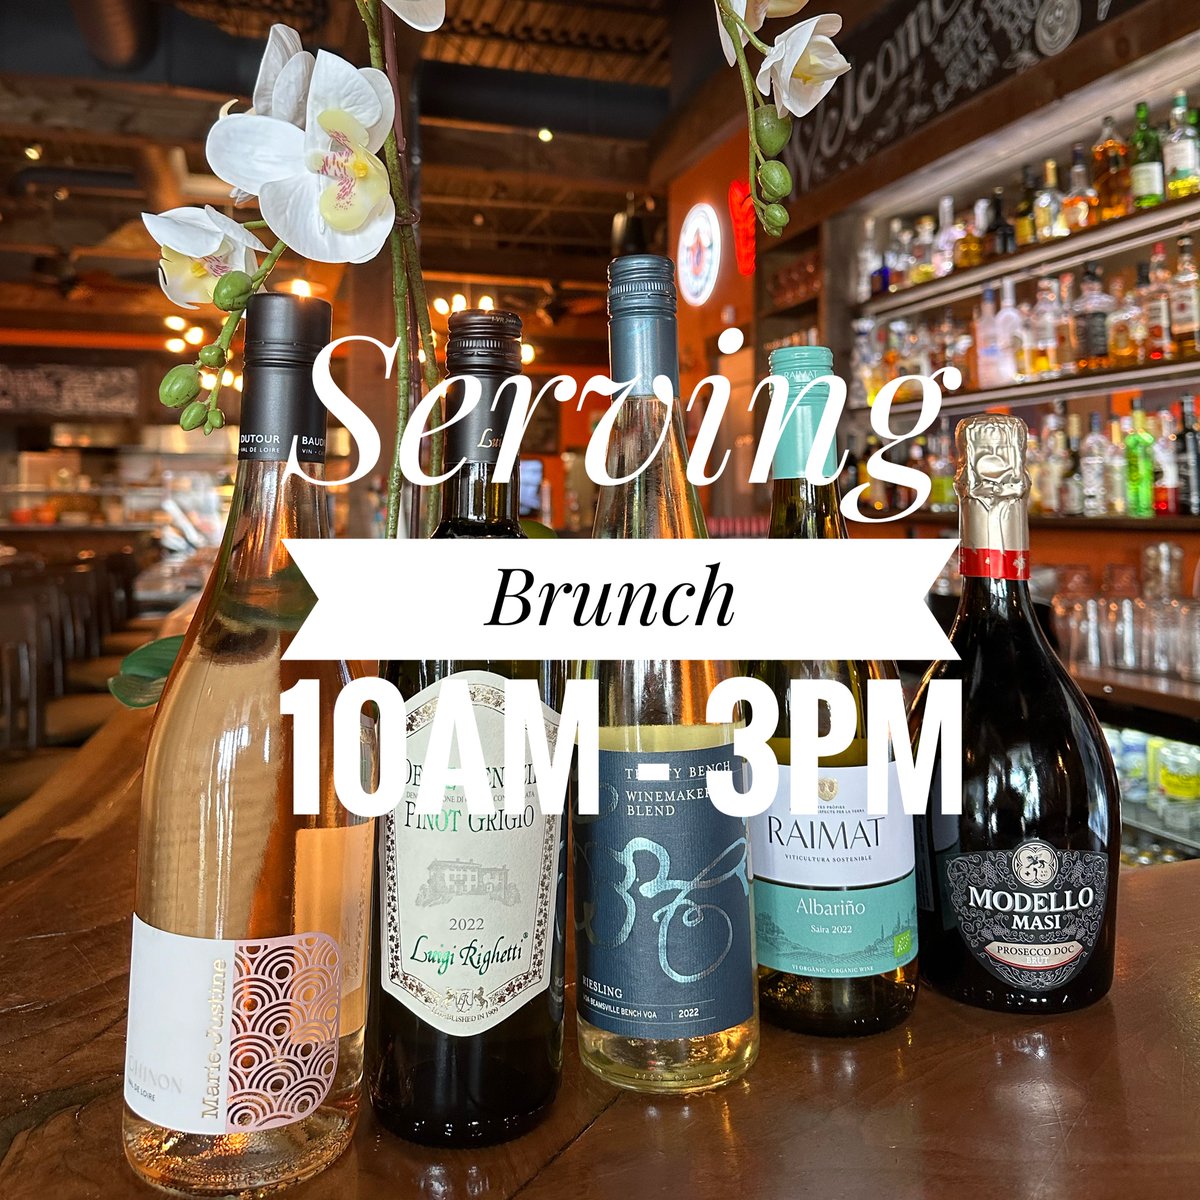 🌸 Don't miss out on our fabulous Mother's Day celebration! 🌟 Treat your mom to a special brunch and dinner with us, and indulge in 1/2 price wine bottles all day long. 🍷💕 #MothersDay #WineLovers #CelebrateMom #SpecialTreats